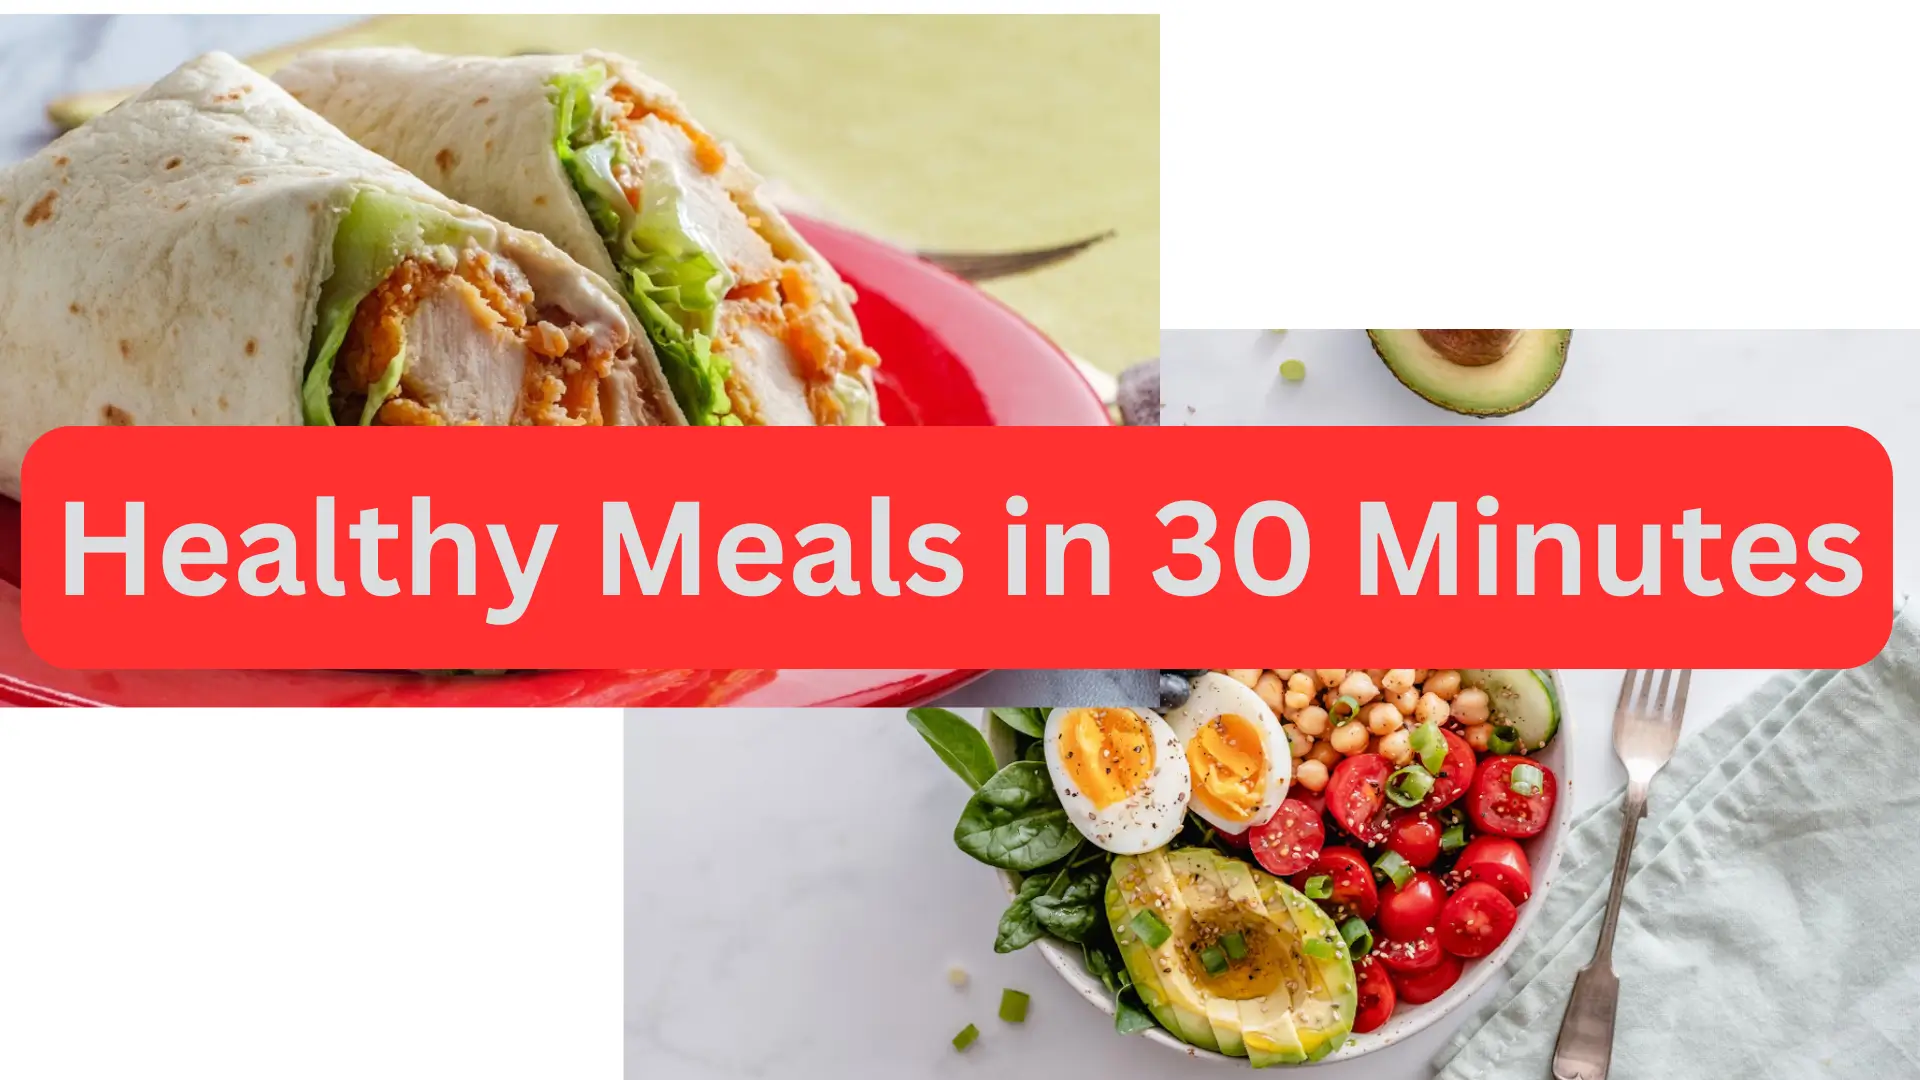 Healthy Meals in 30 Minutes